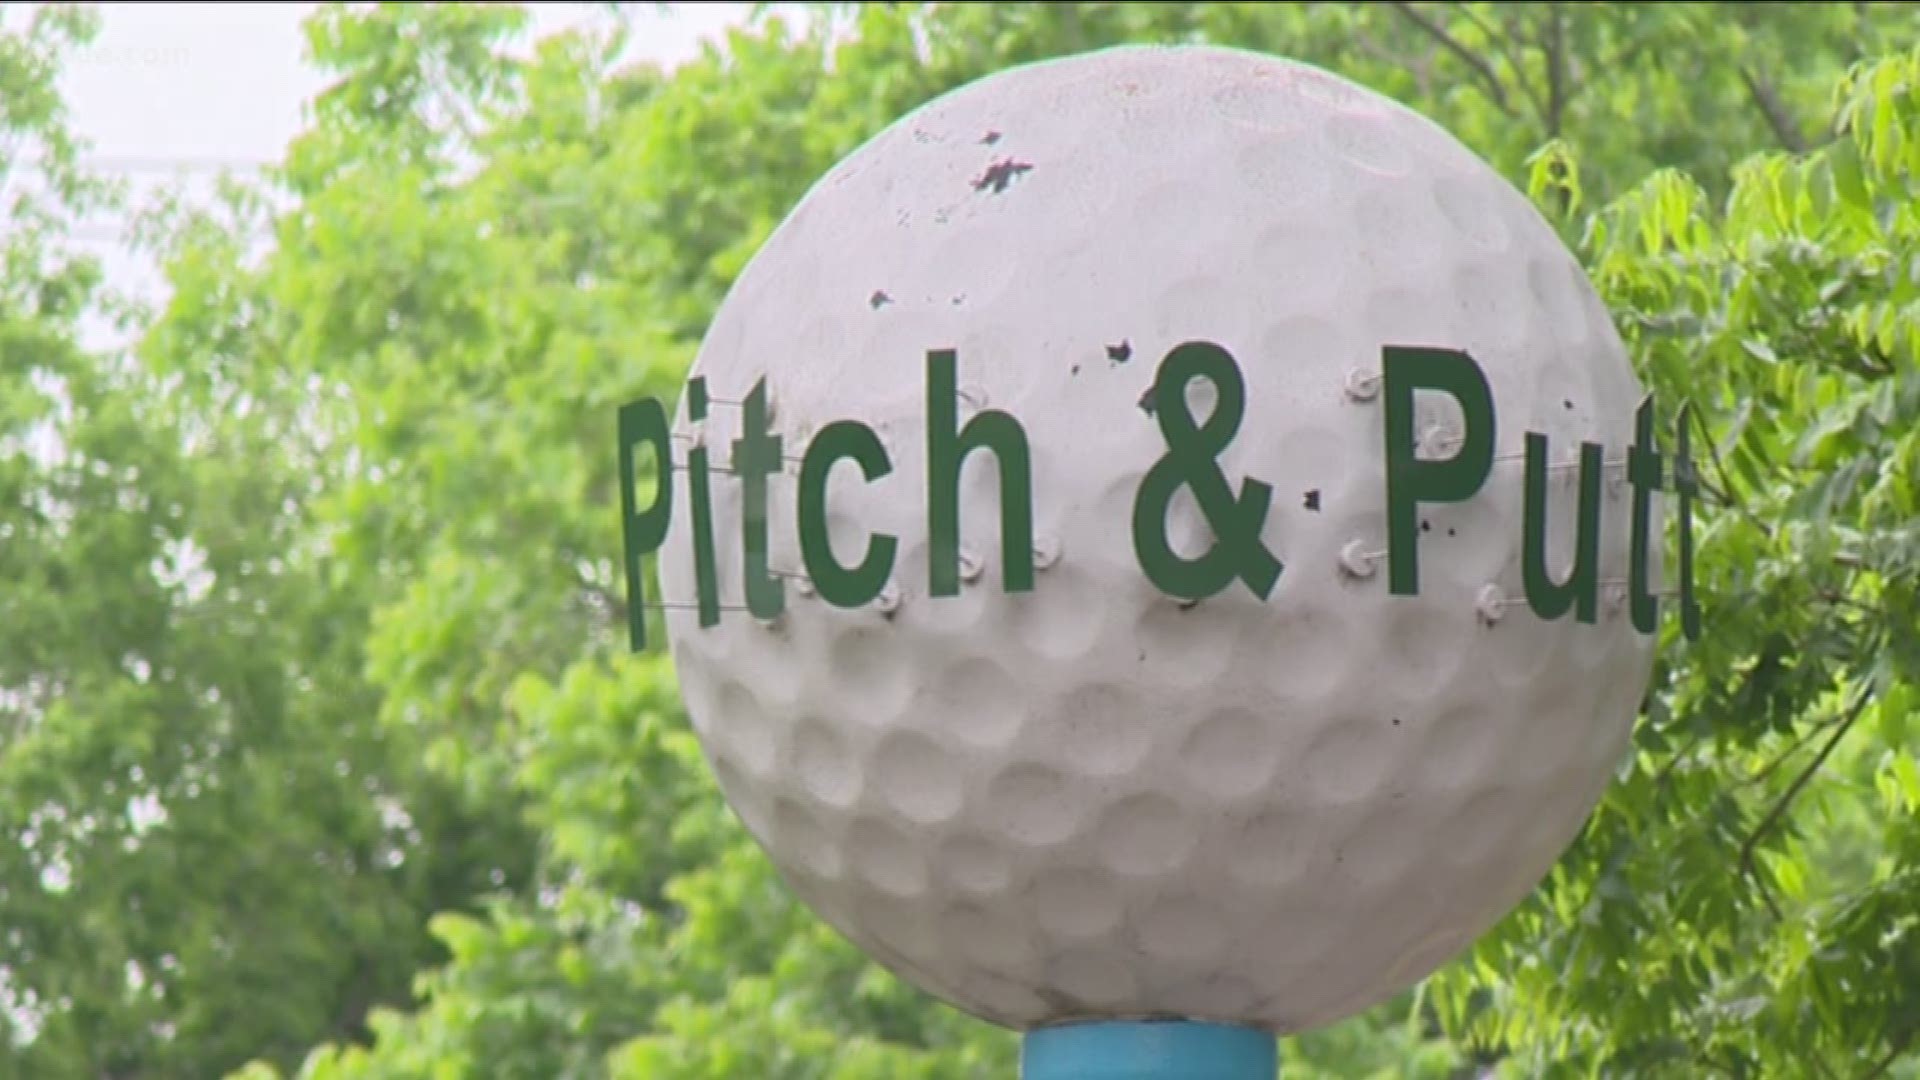 August 12 marks the end of an era for Butler Park Pitch and Putt.